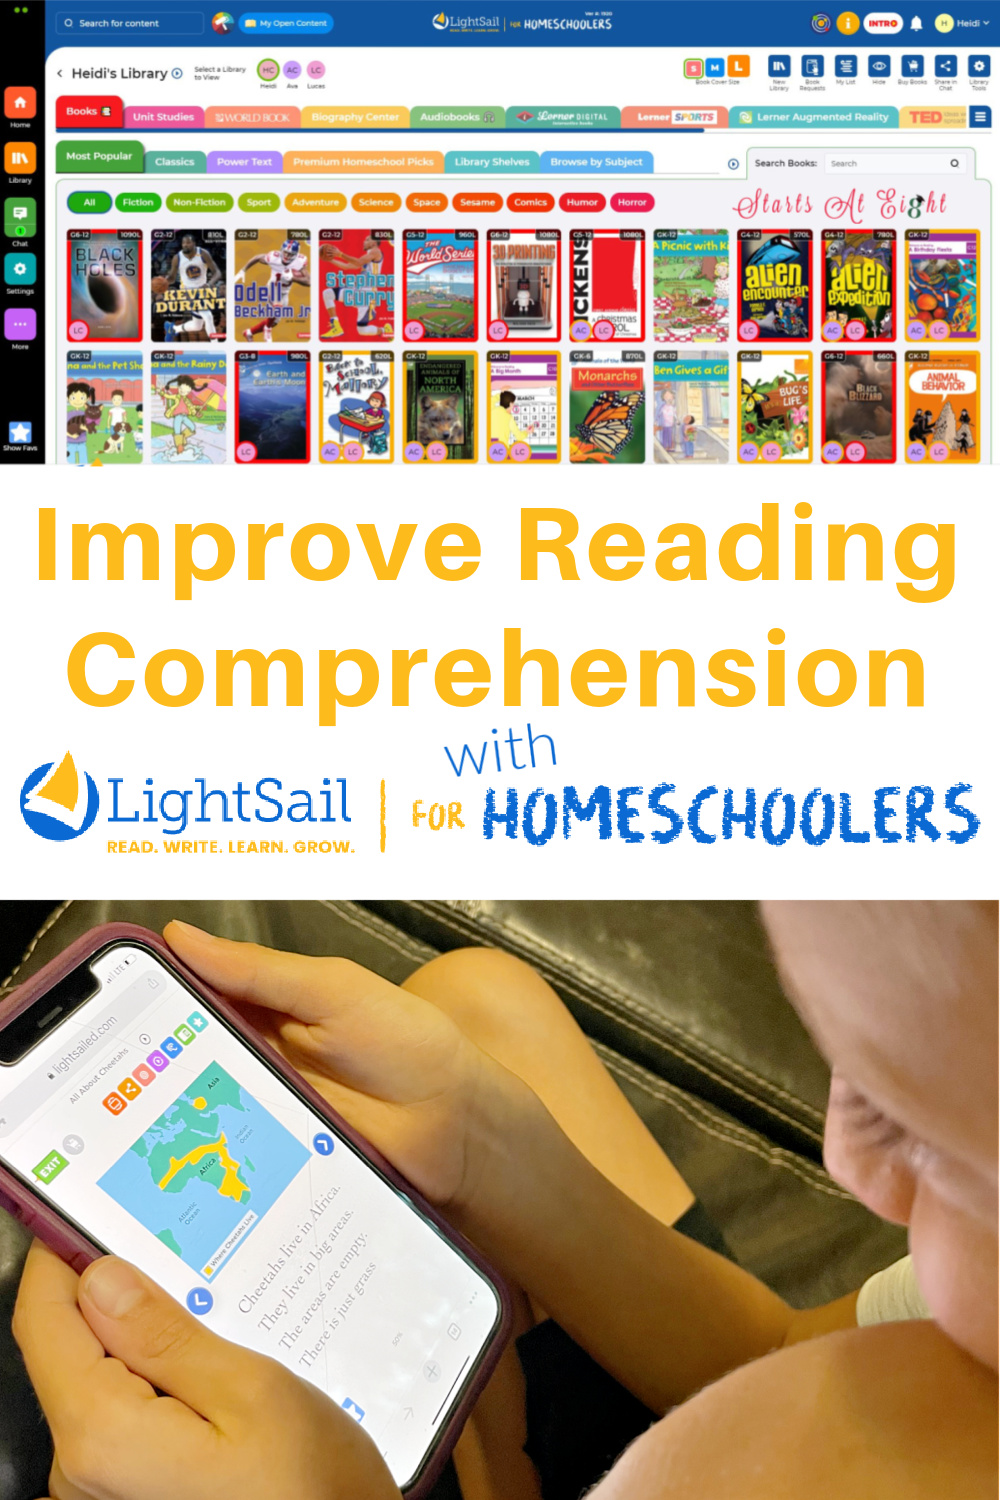 Lightsail for Homeschoolers is an online language arts program for preK-12 that advances skills in reading, writing, vocabulary and fluency.